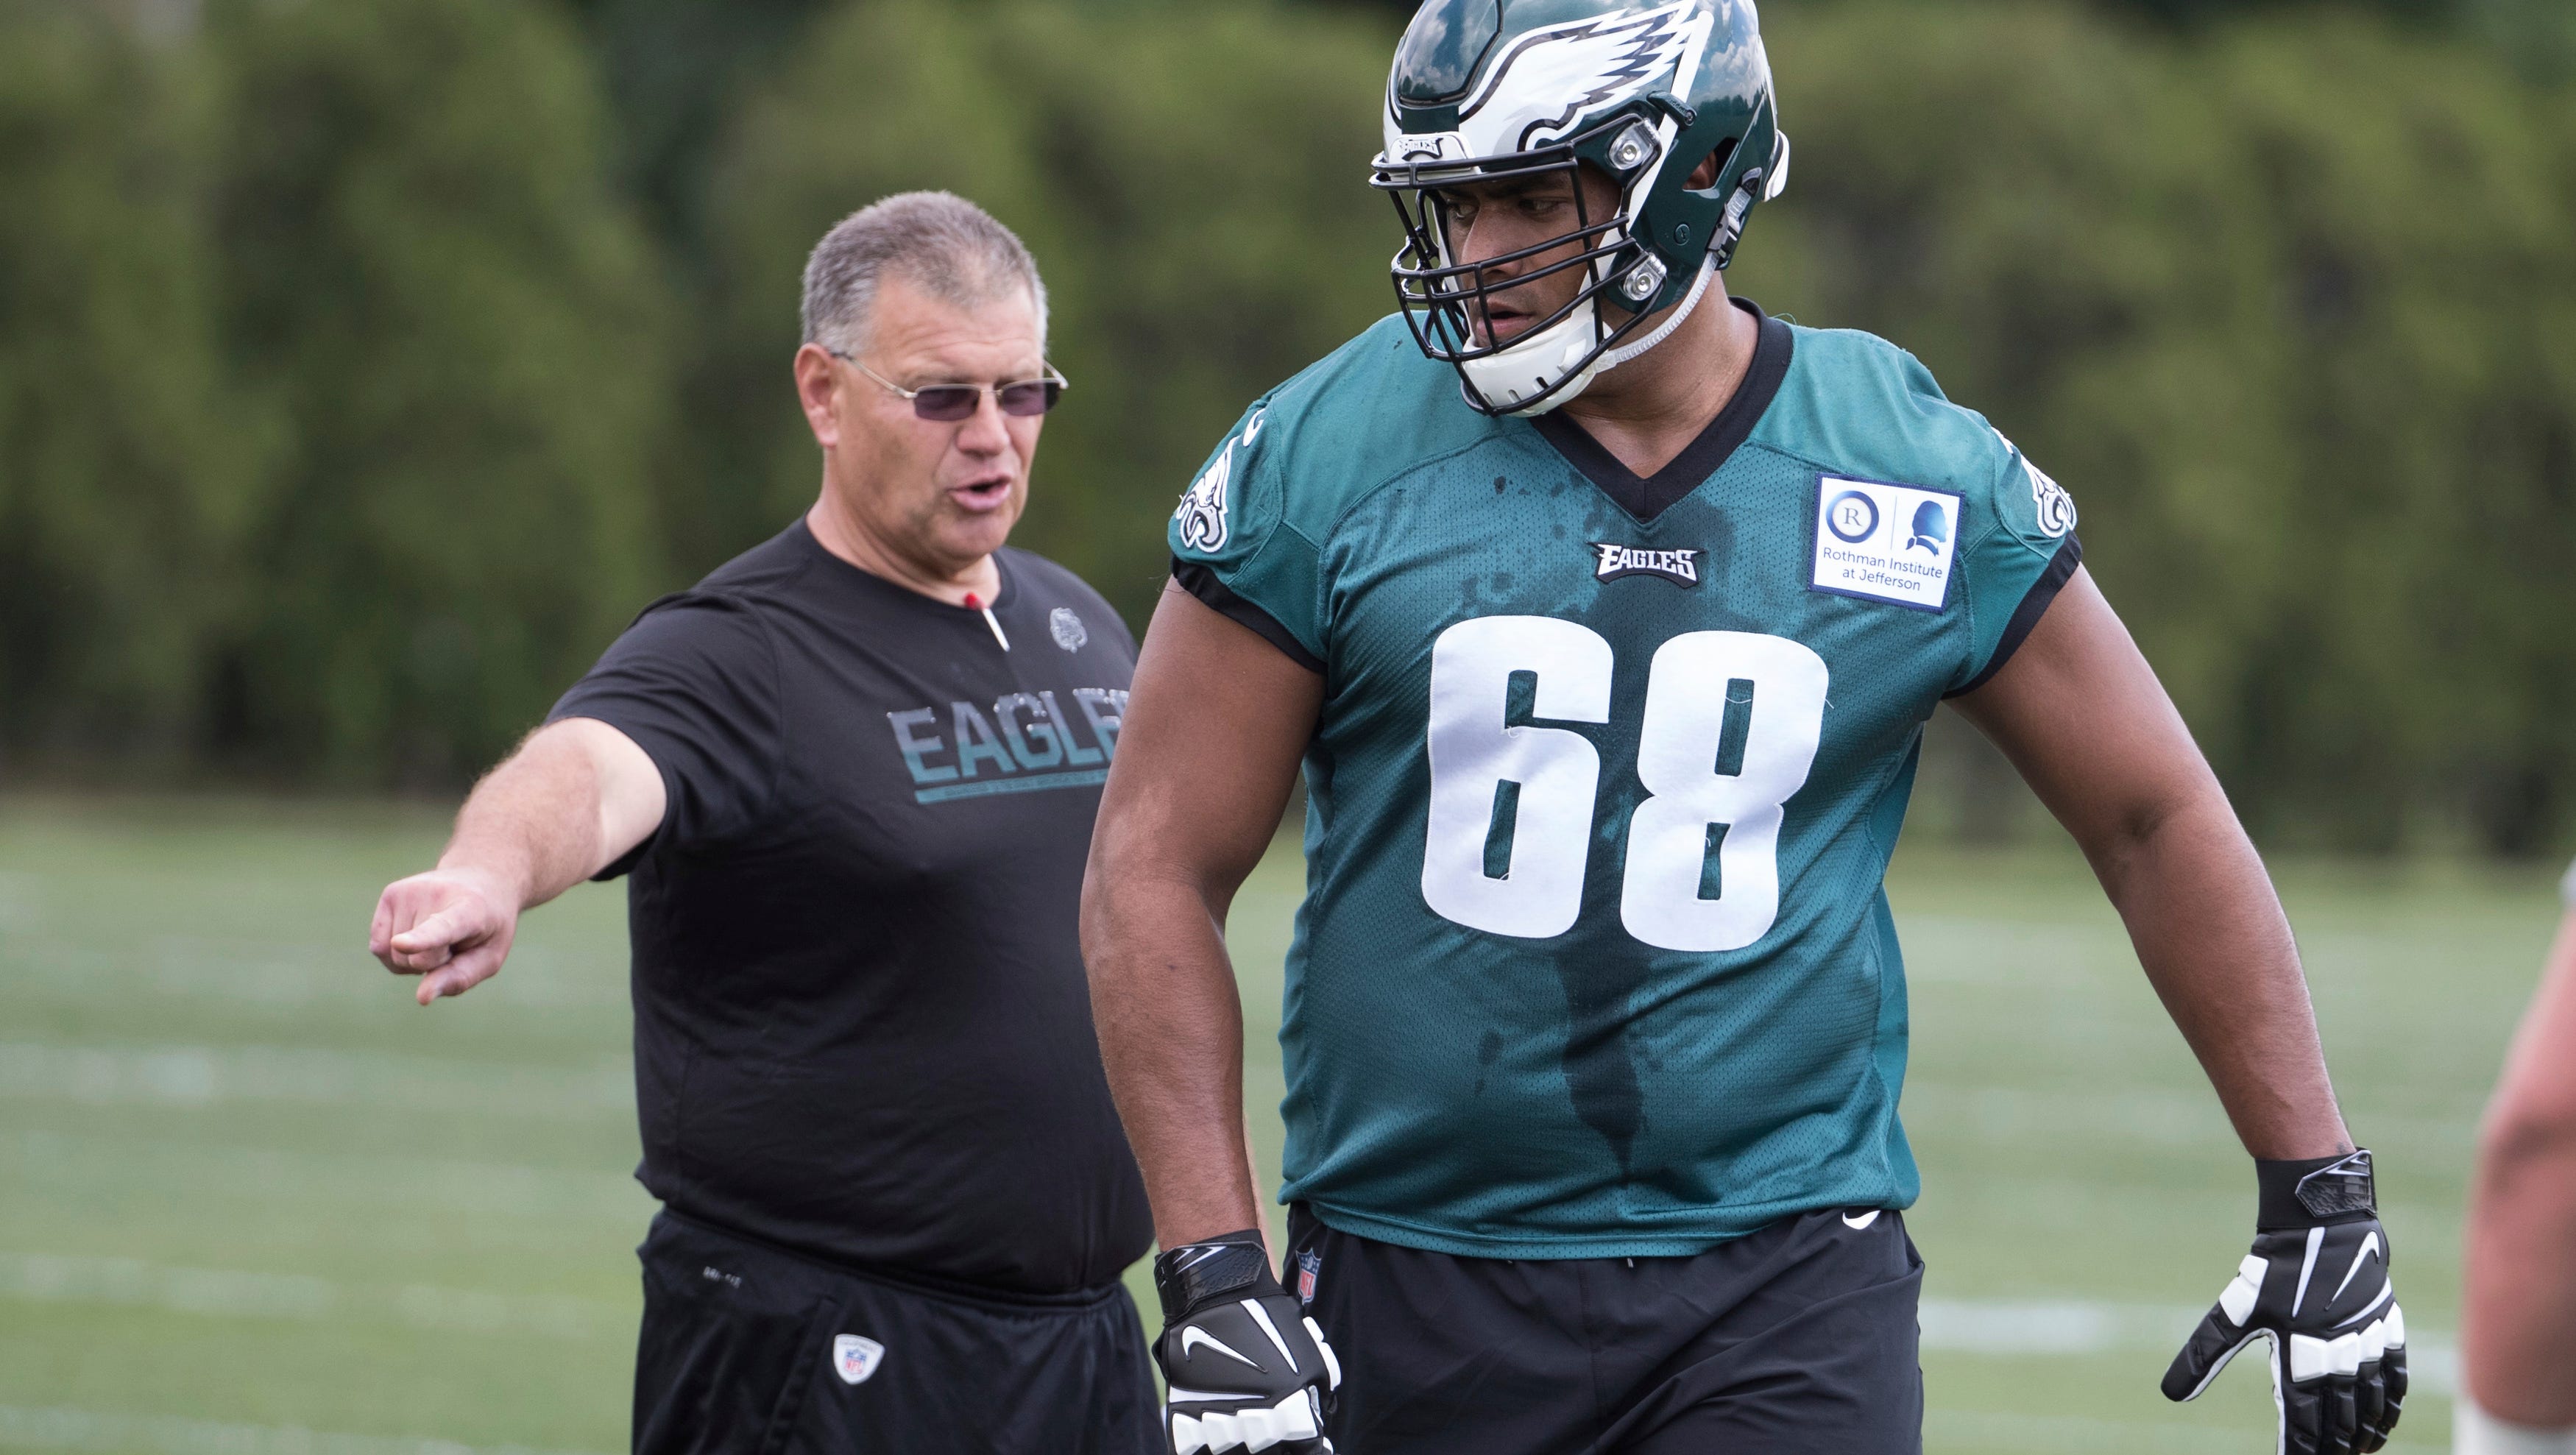 With ex-Australian rugby player, Eagles showing size matters on O-line